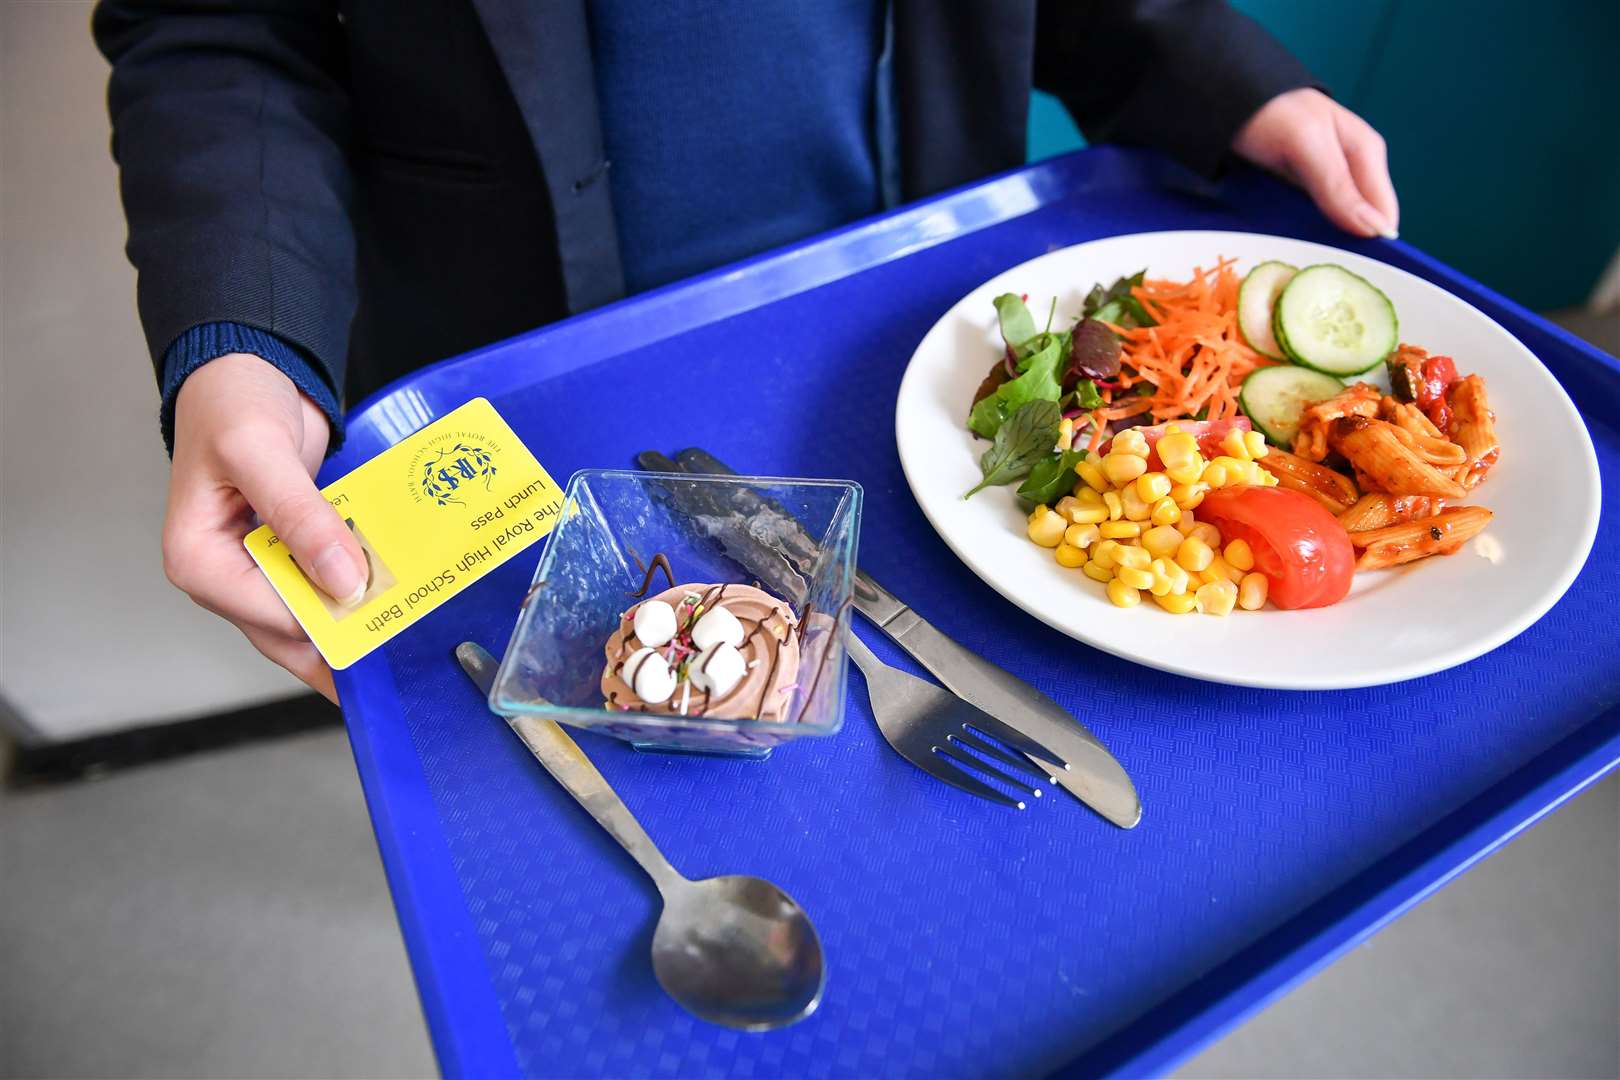 The Alba Party has pledged free school meals for all pupils (Ben Birchall/PA)